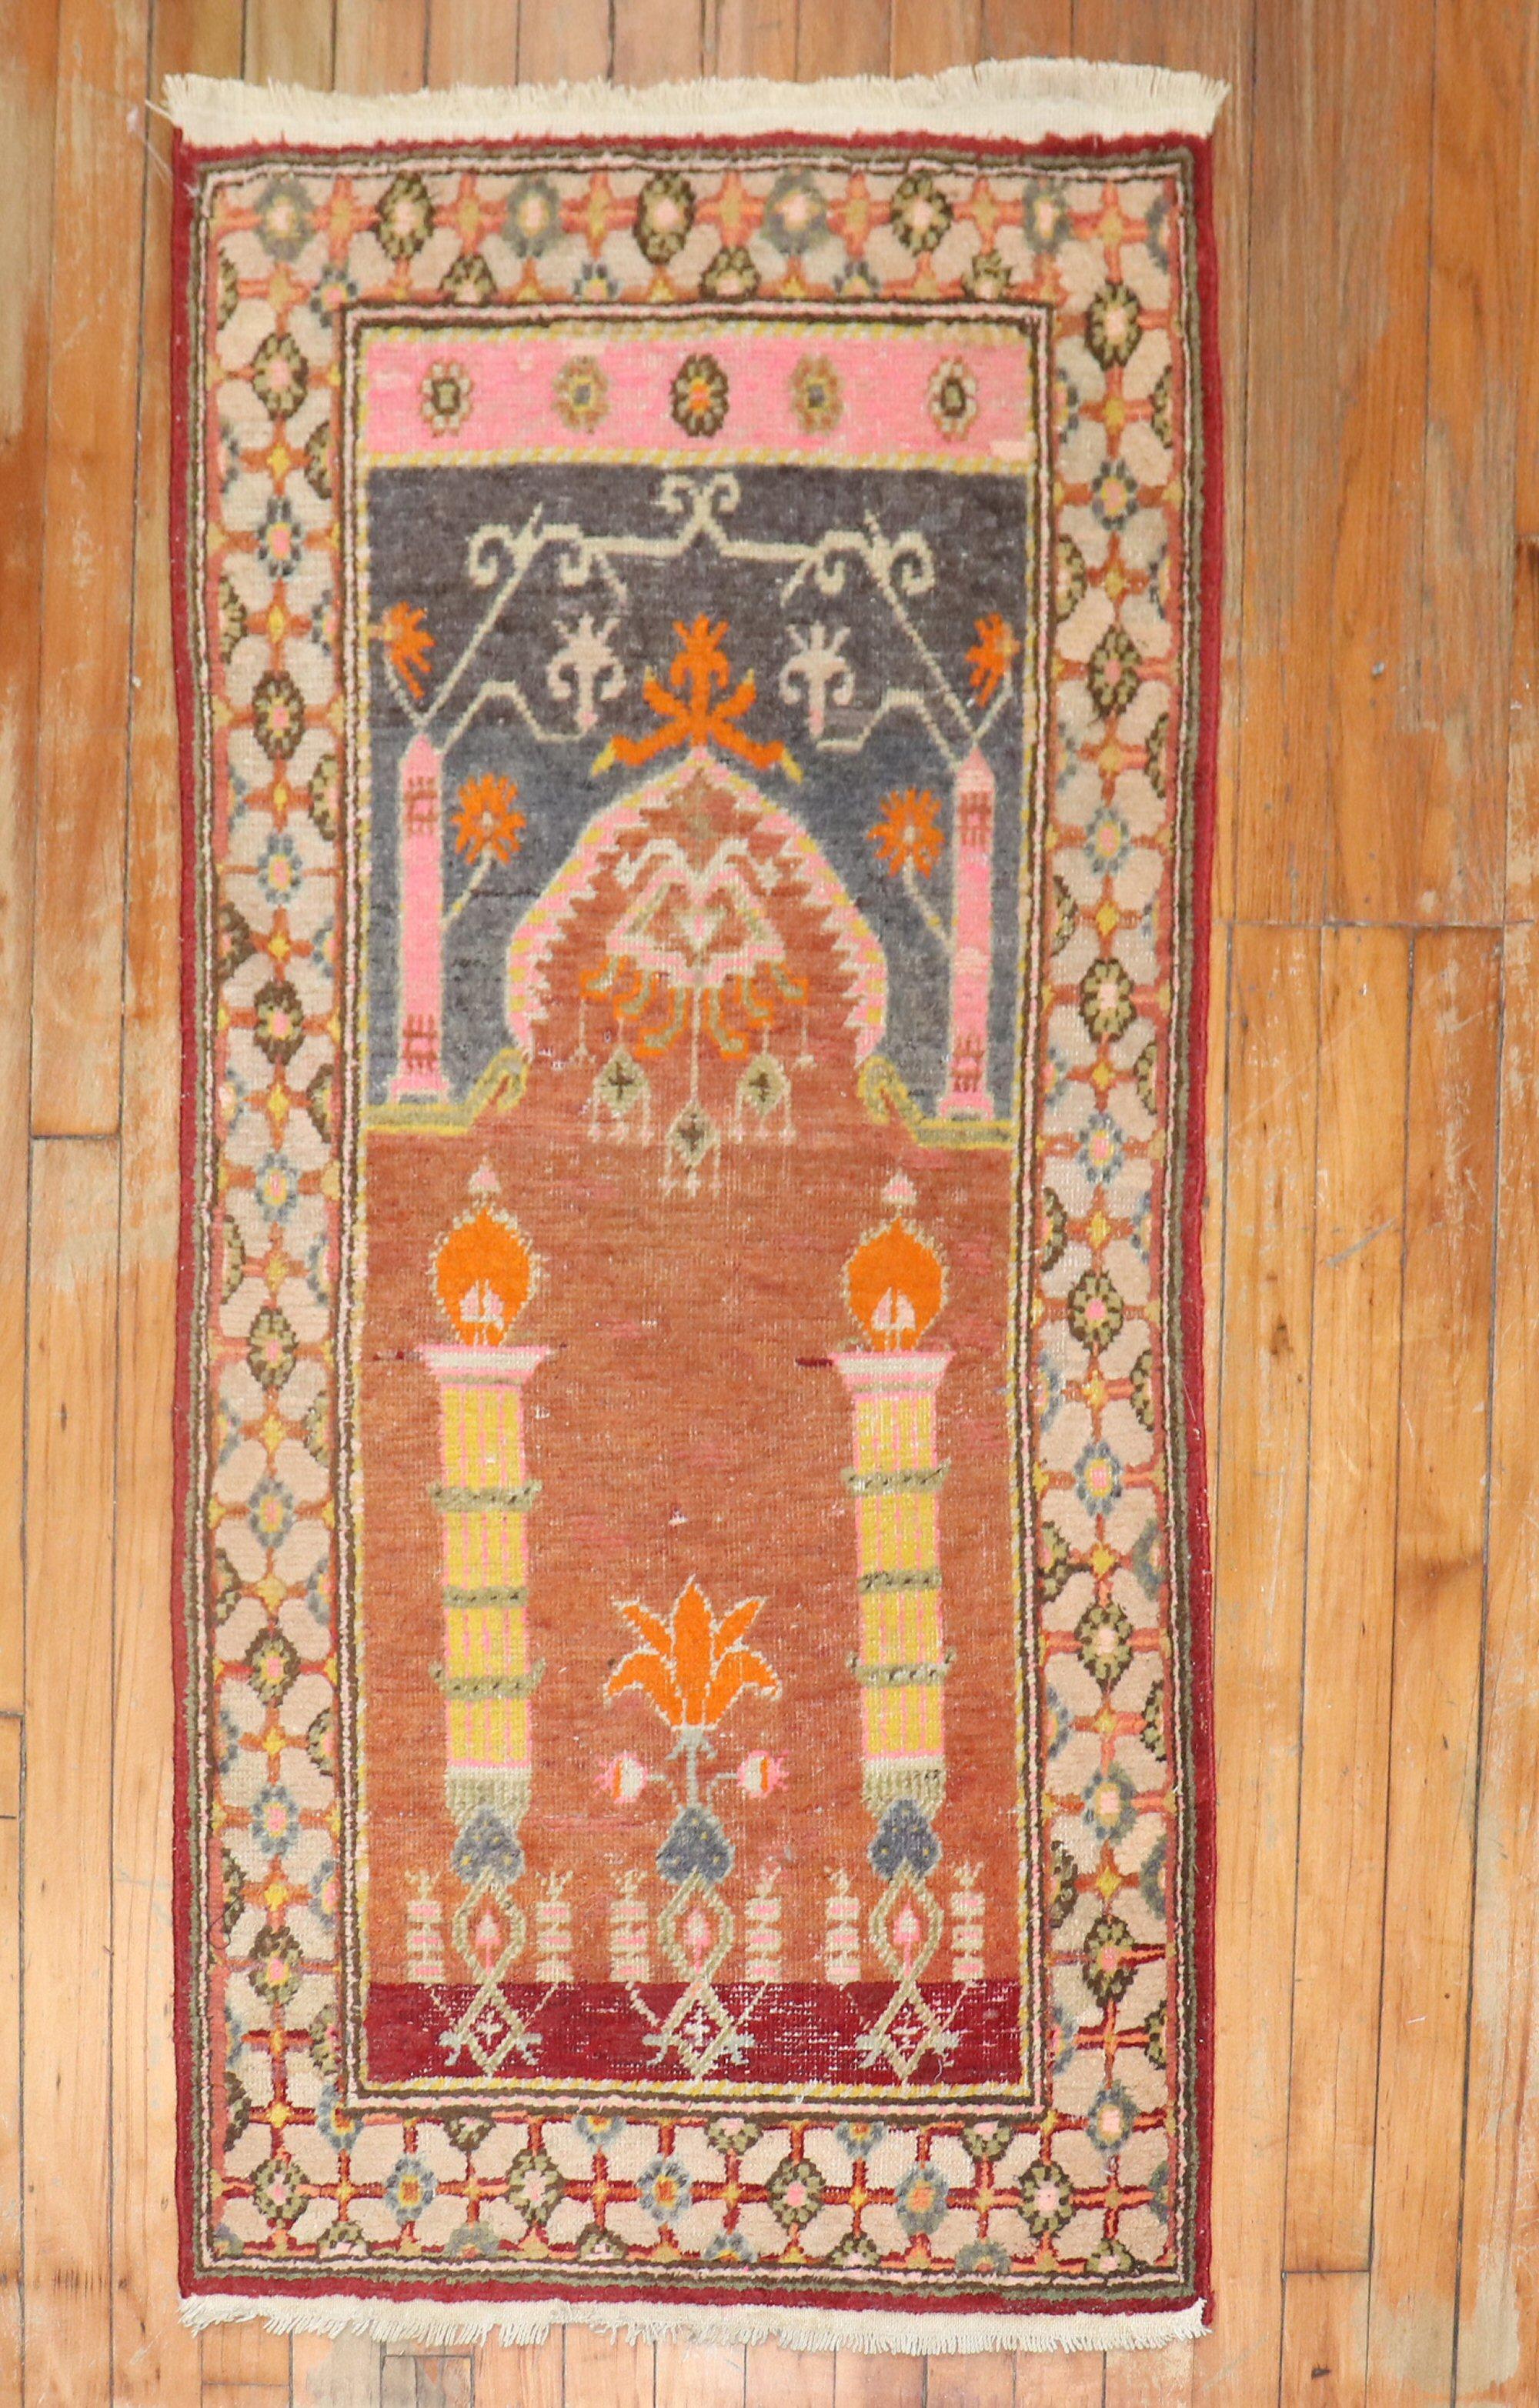 Rare Prayer niche pattern Khotan small size rug from the early 20th century.
we have never seen an east Turkestan Khotan rug with this prayer design. Purchased from a collector in Washington DC.

Measures: 2'1'' x 4'1''.